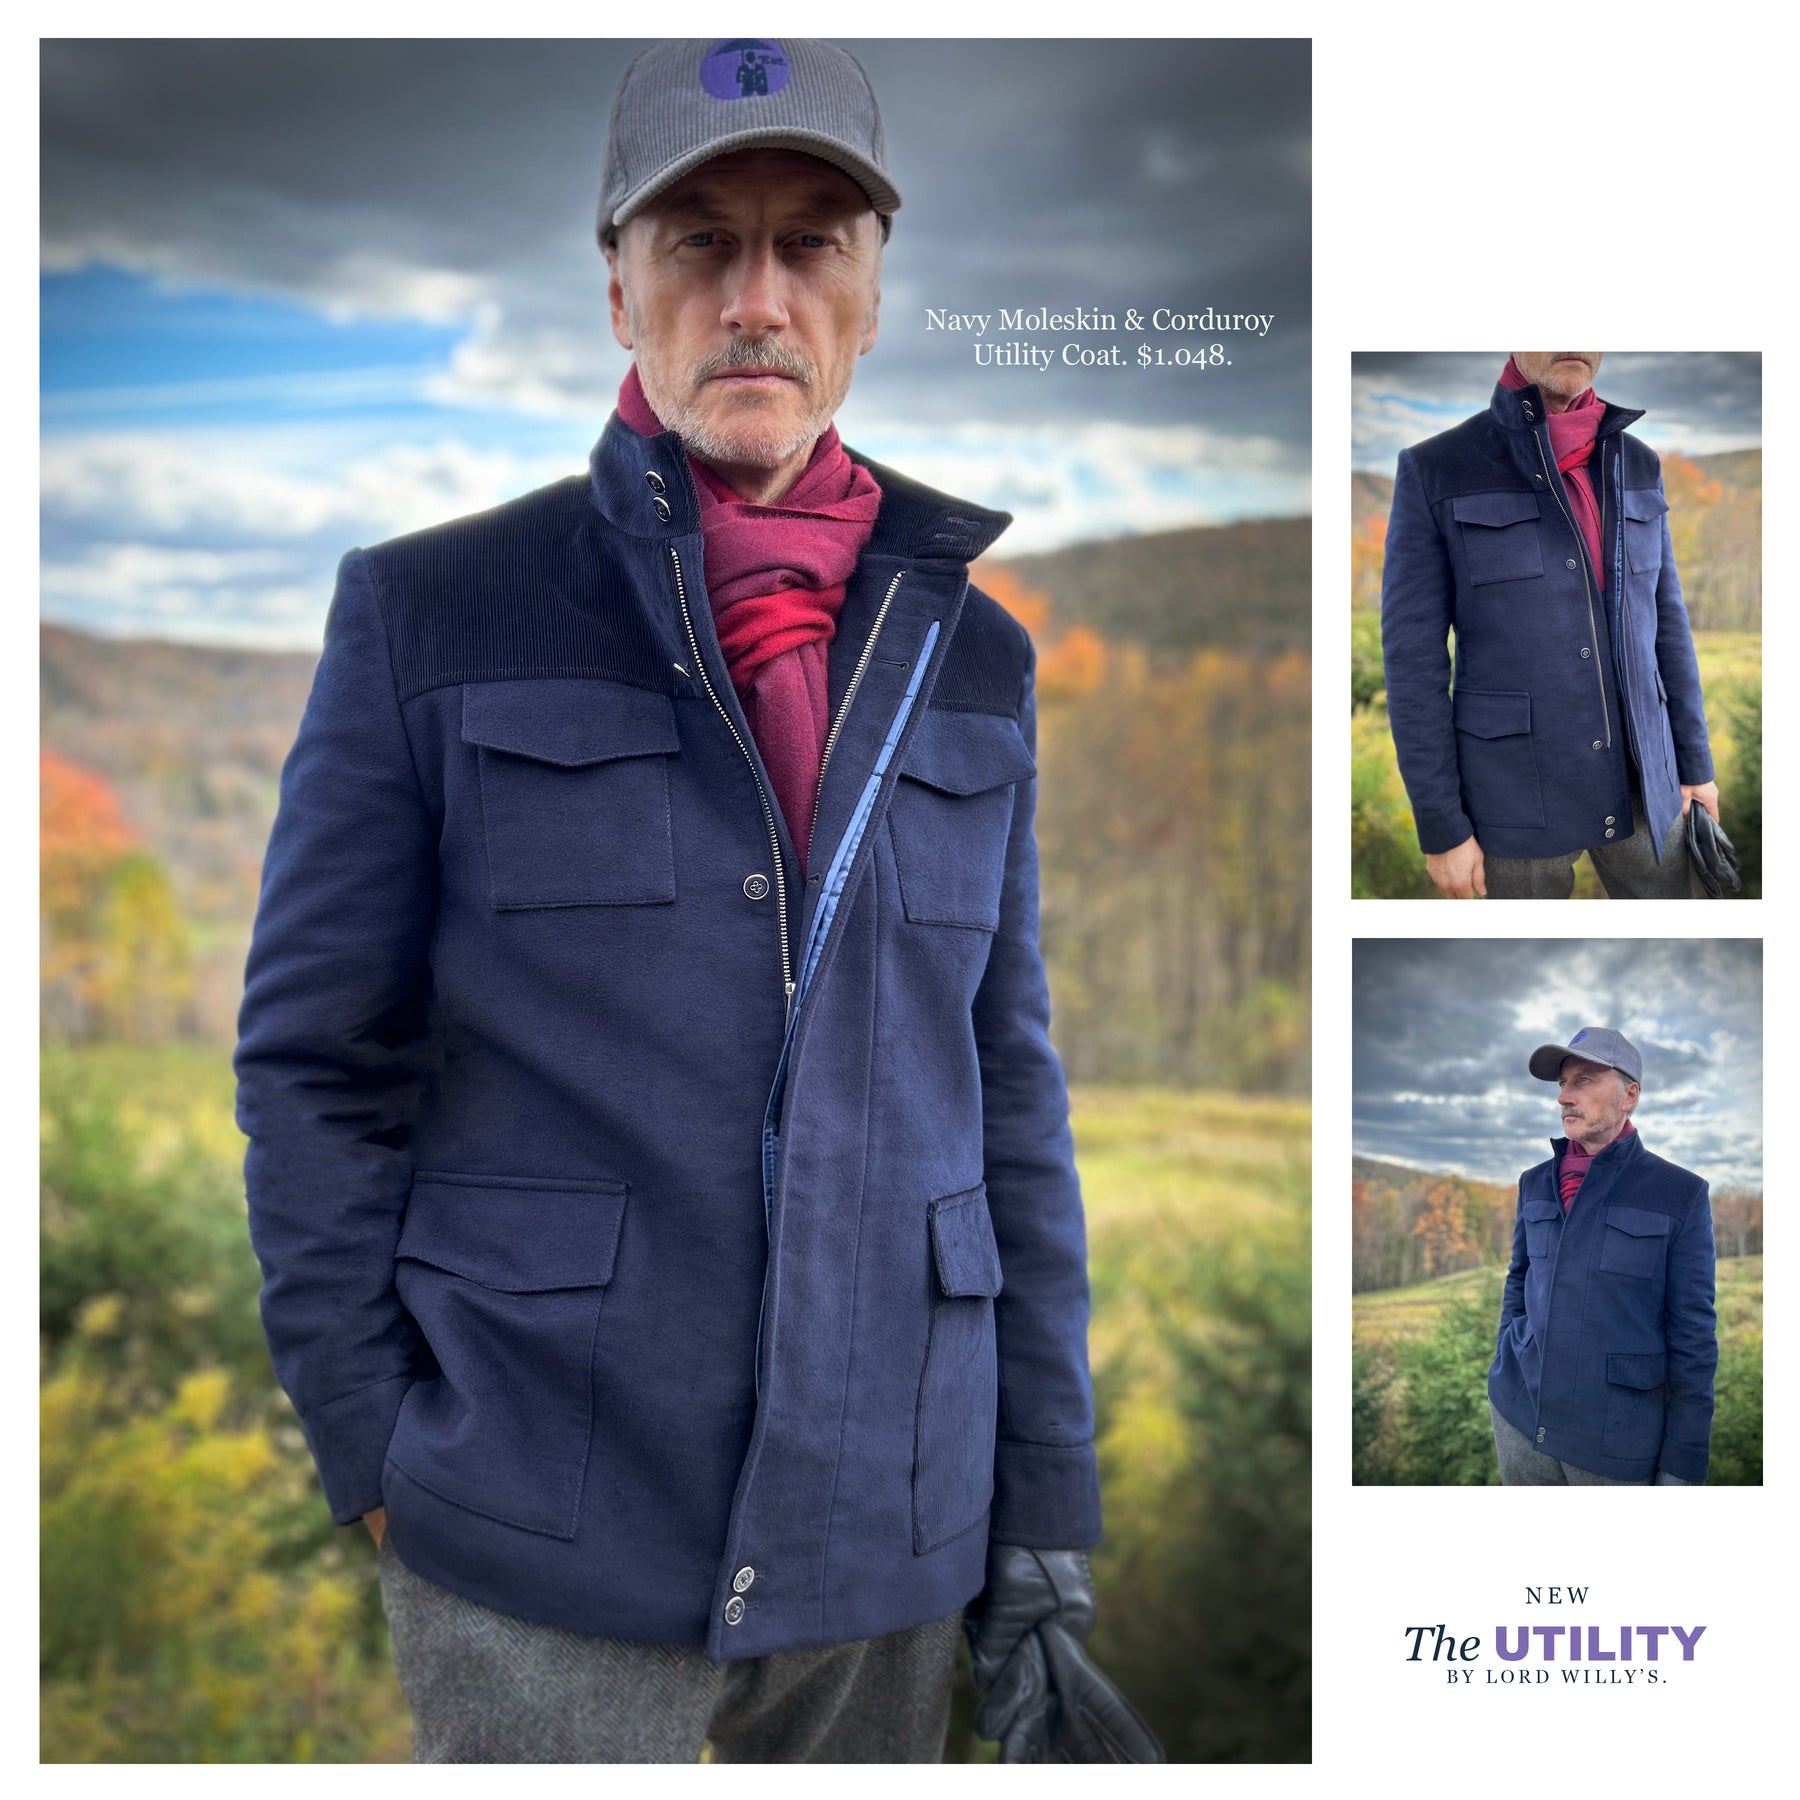 Man wearing Navy Utility Coat in Moleskin and Corduroy. $1,048. Thank you.